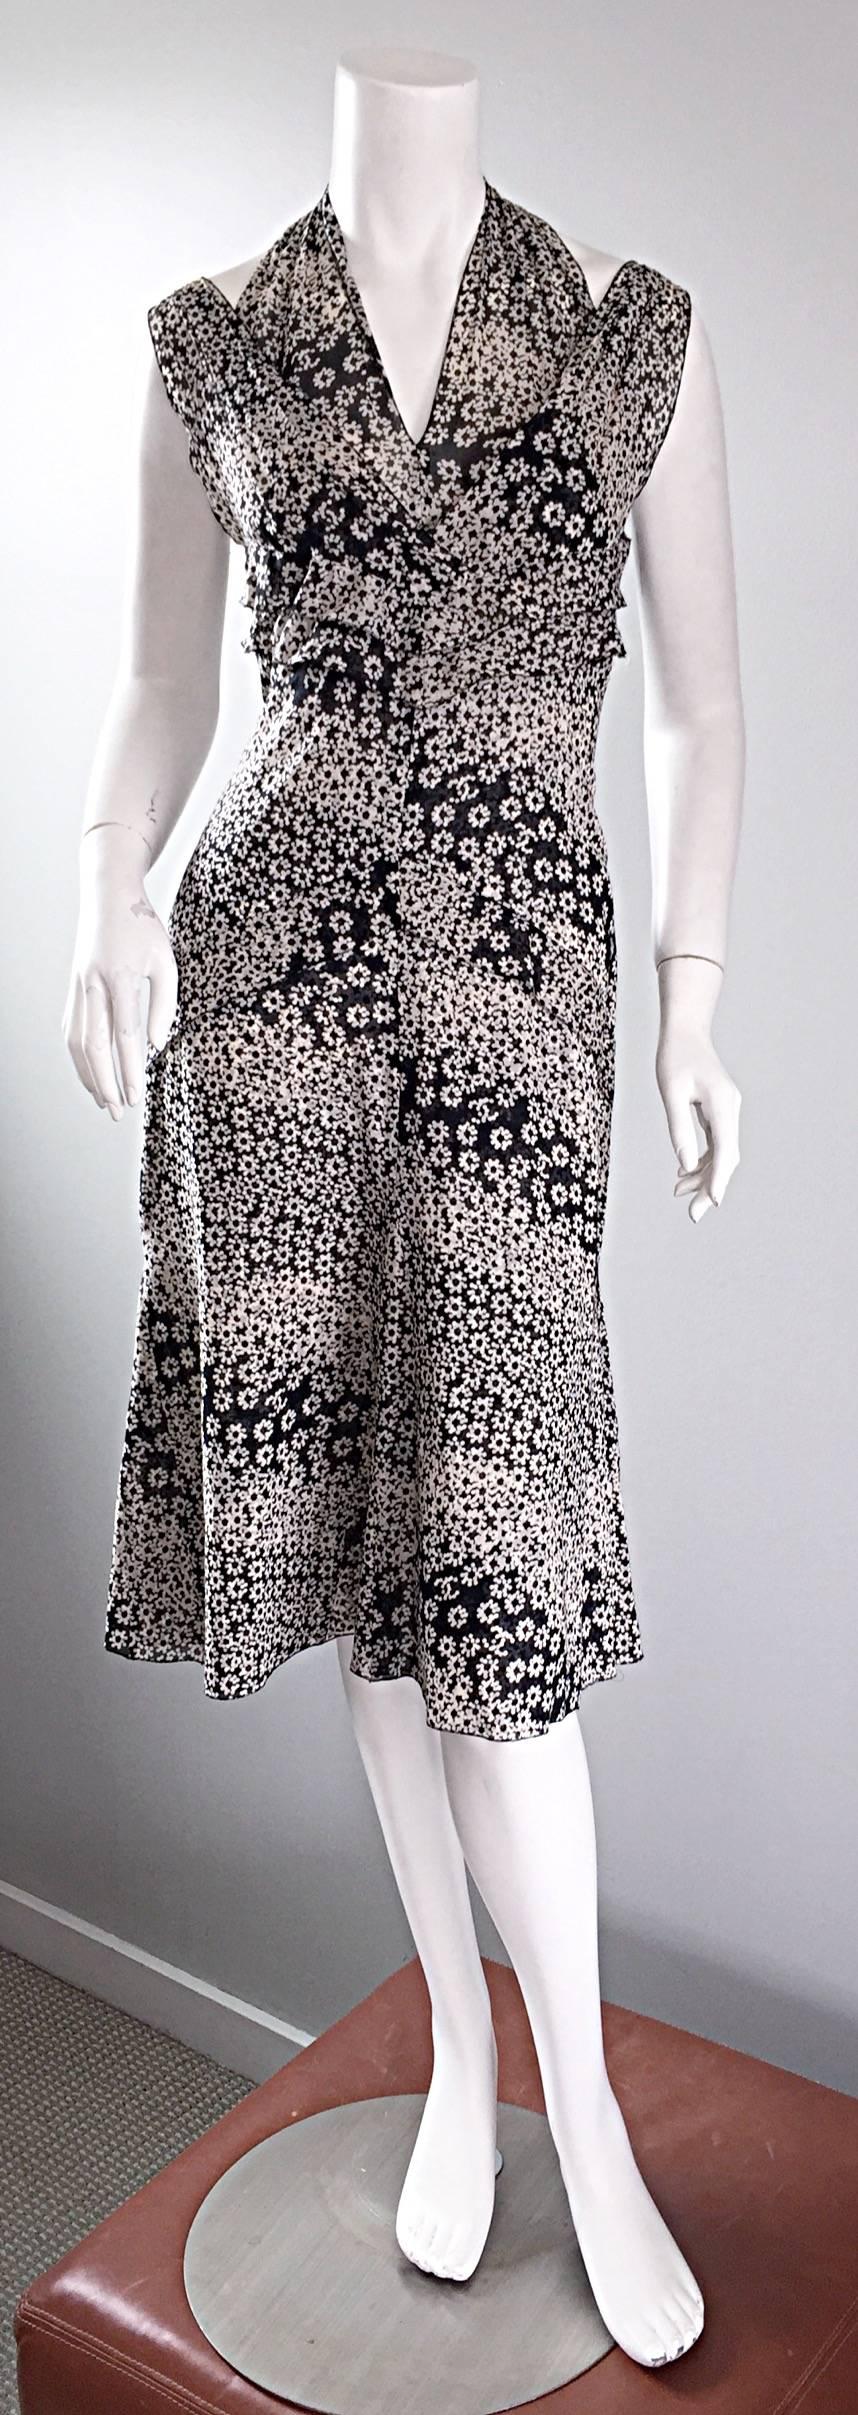 Incredible CHANEL dress from the resort 2003 collection! Two layers of lightweight cotton, with black and white printed flowers, and the CC logo intermixed throughout. Features shoulder straps with an attached halter neck that closes with three